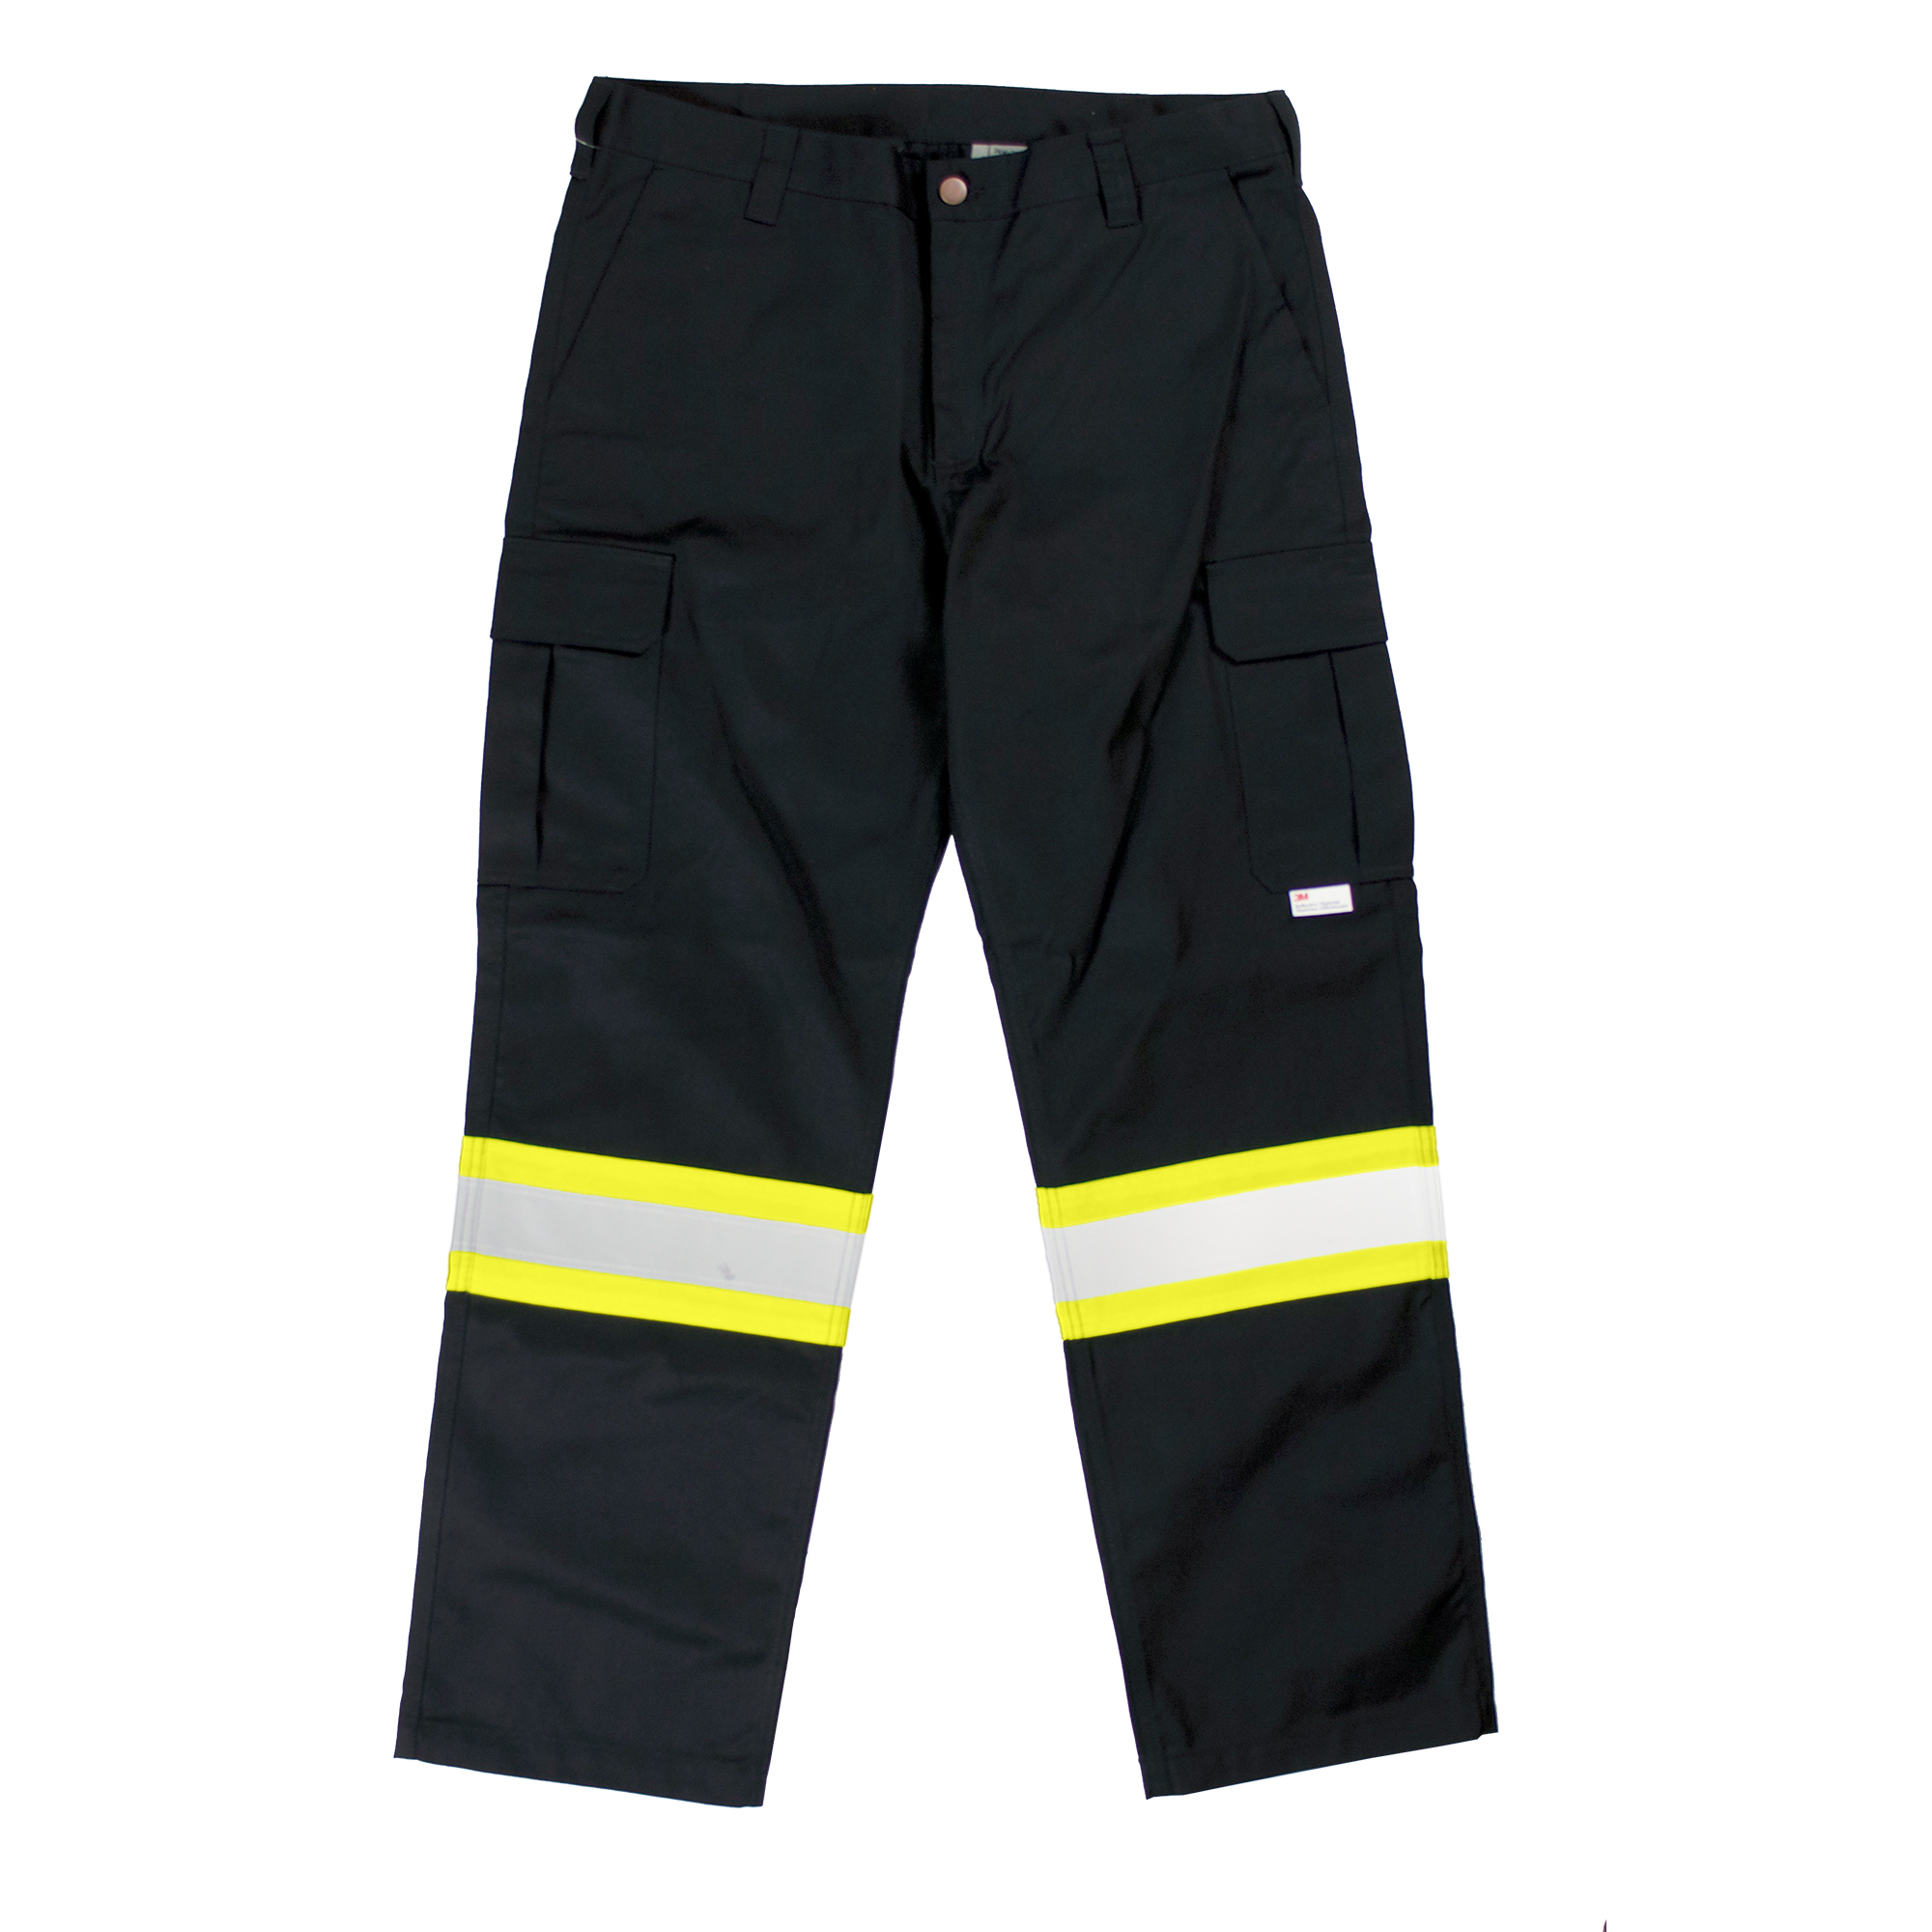 Tough Duck, Safety Cargo Utility Pant, Waist 34 in, Inseam 32 in, Color Black, Model S60711